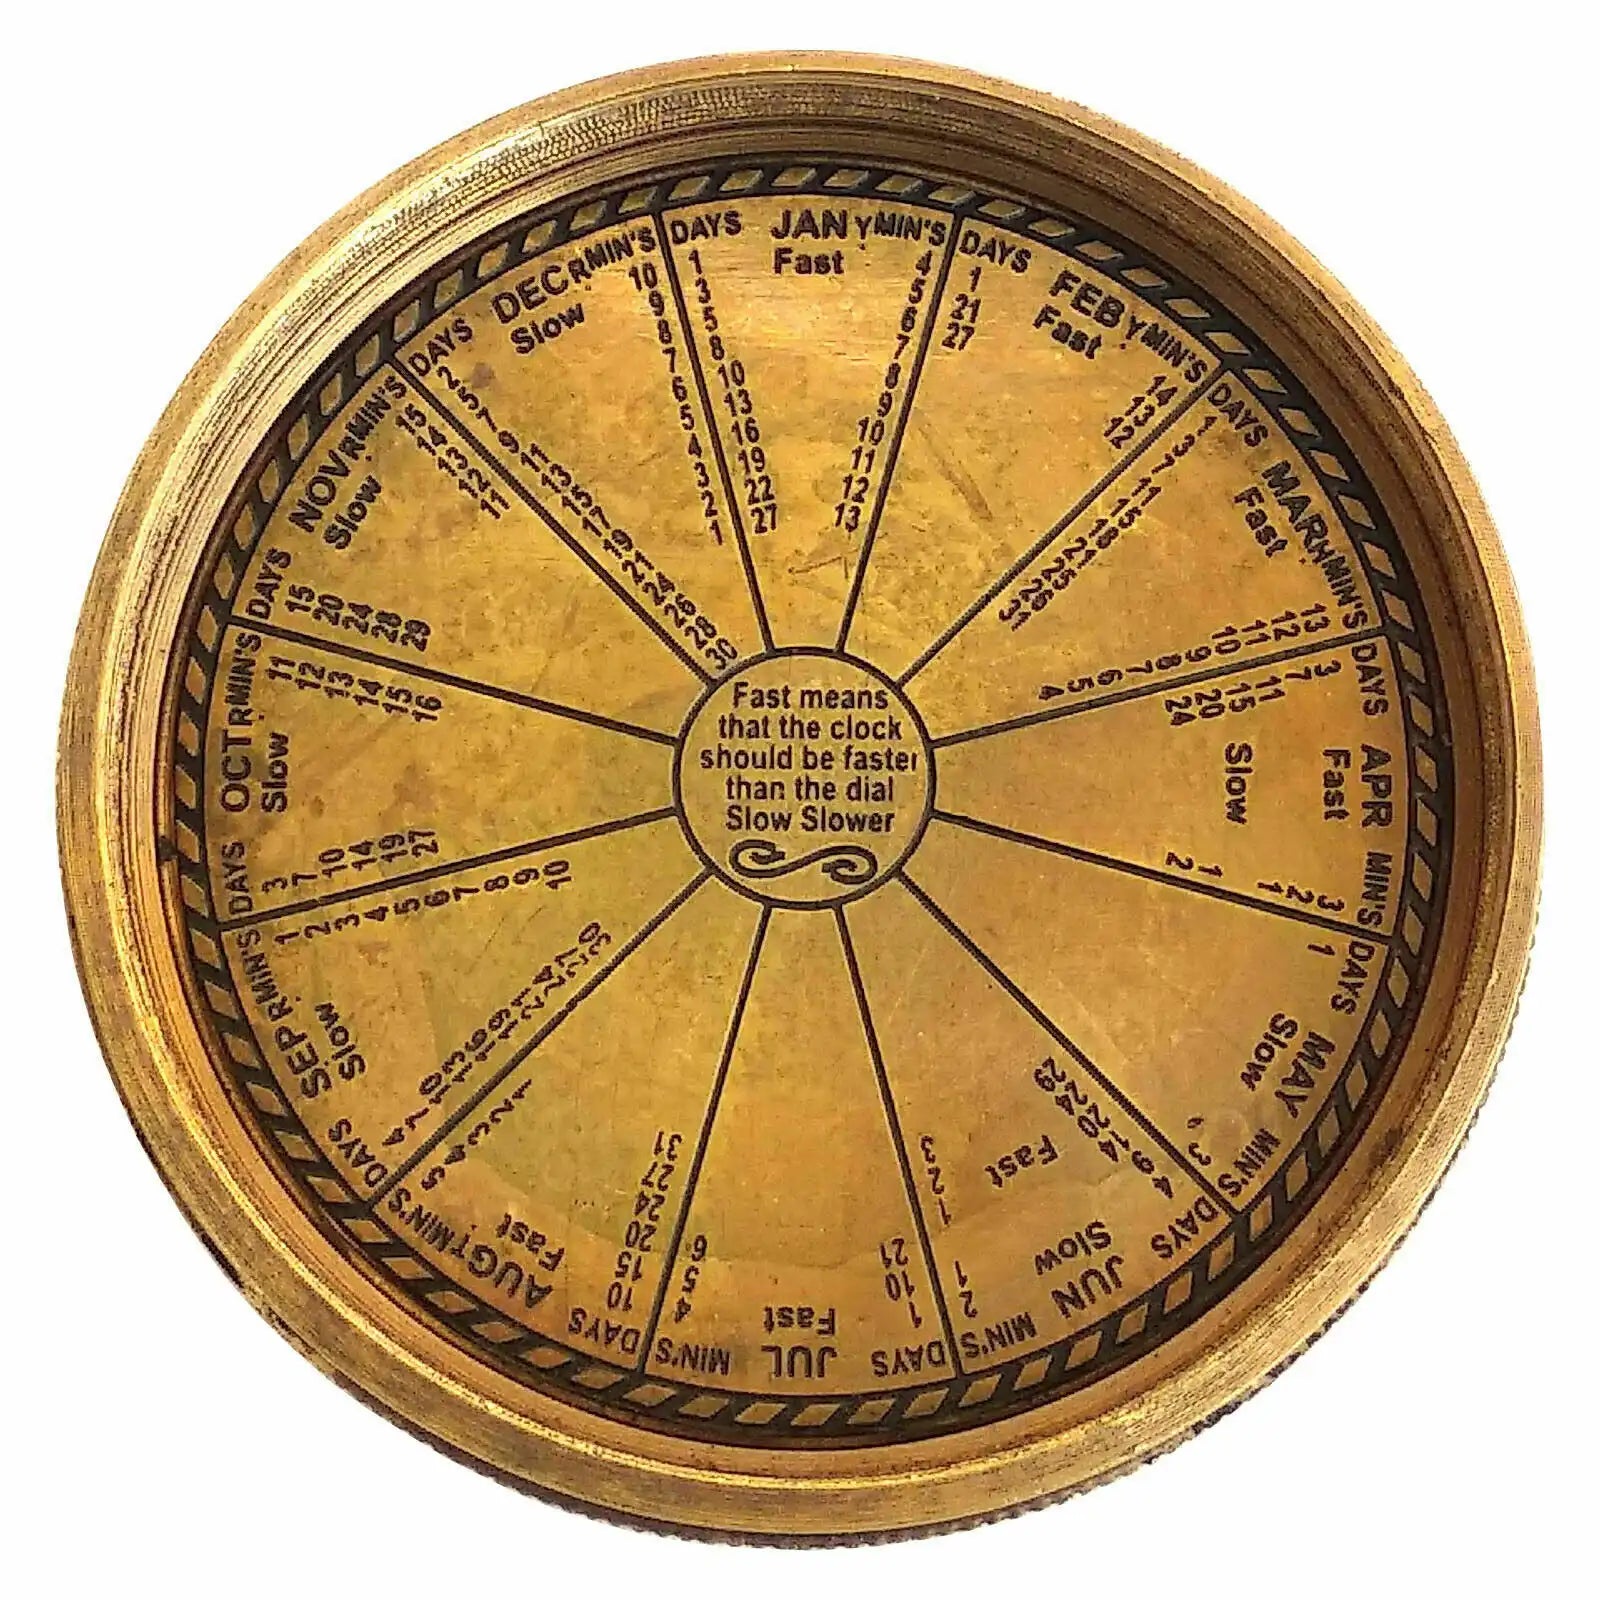 LORD KELVIN's Antique Nautical Brass Lid Sundial Compass